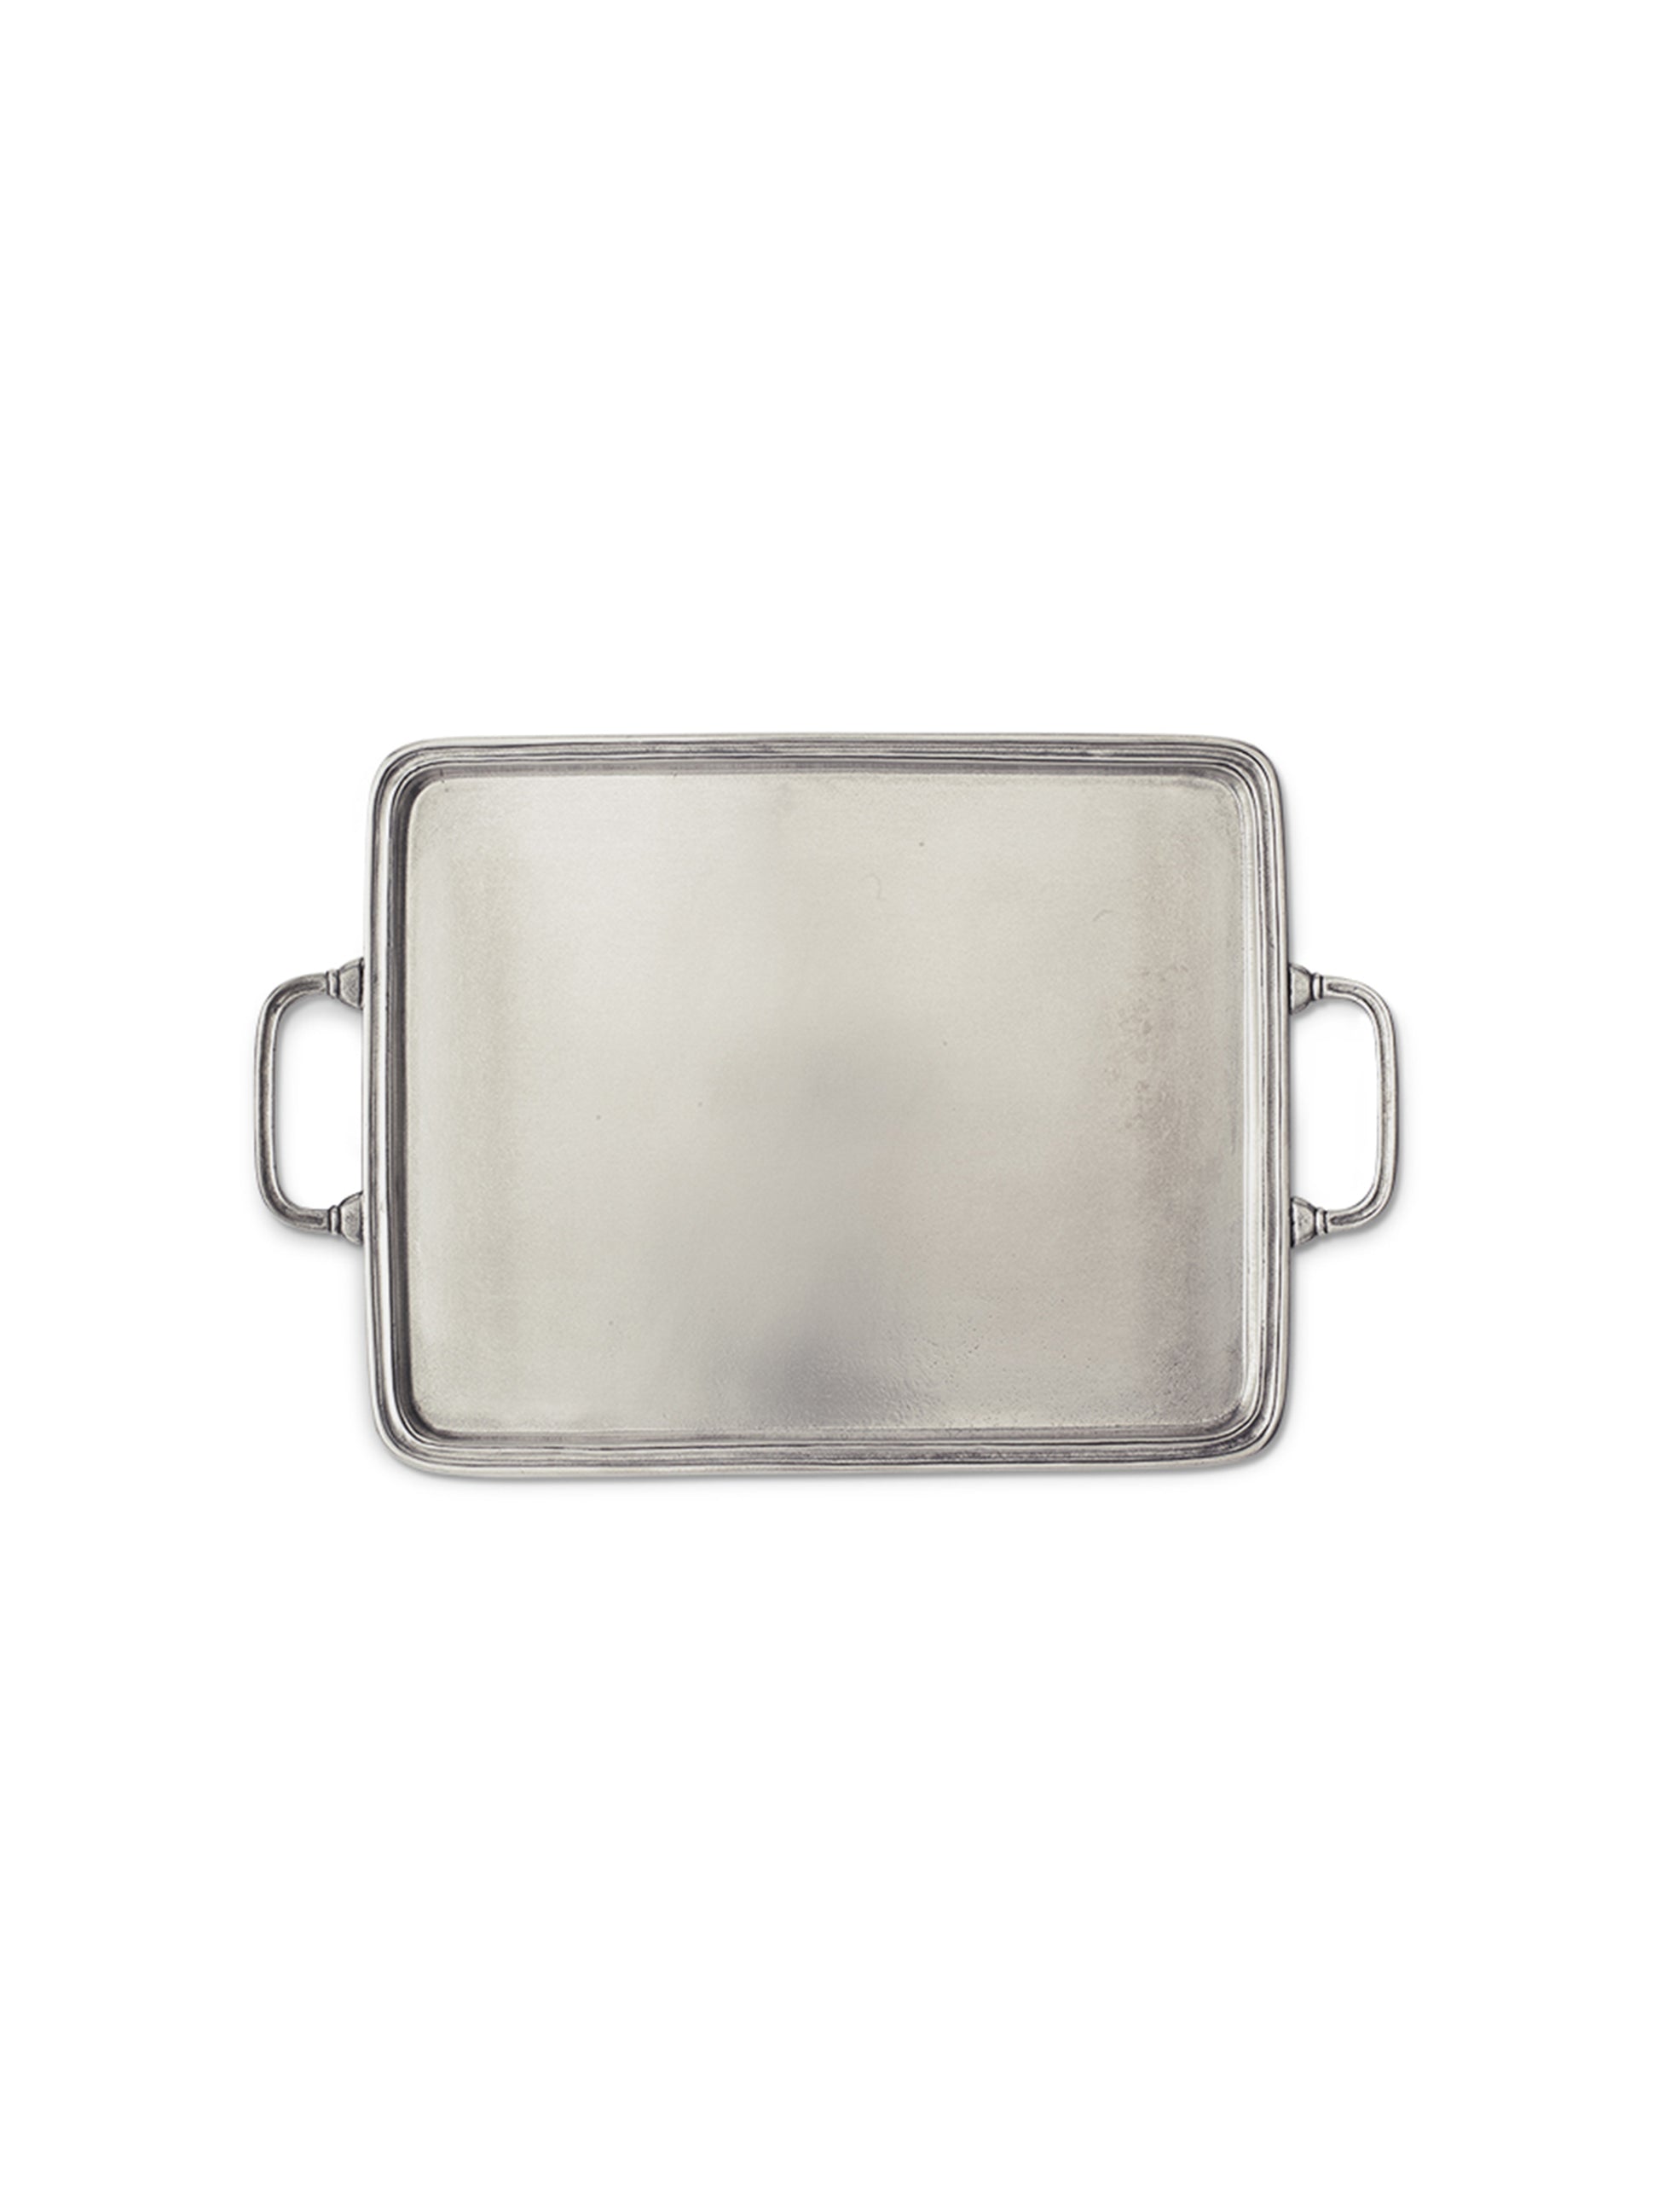 MATCH Pewter Rectangle Trays with Handles Medium Weston Table